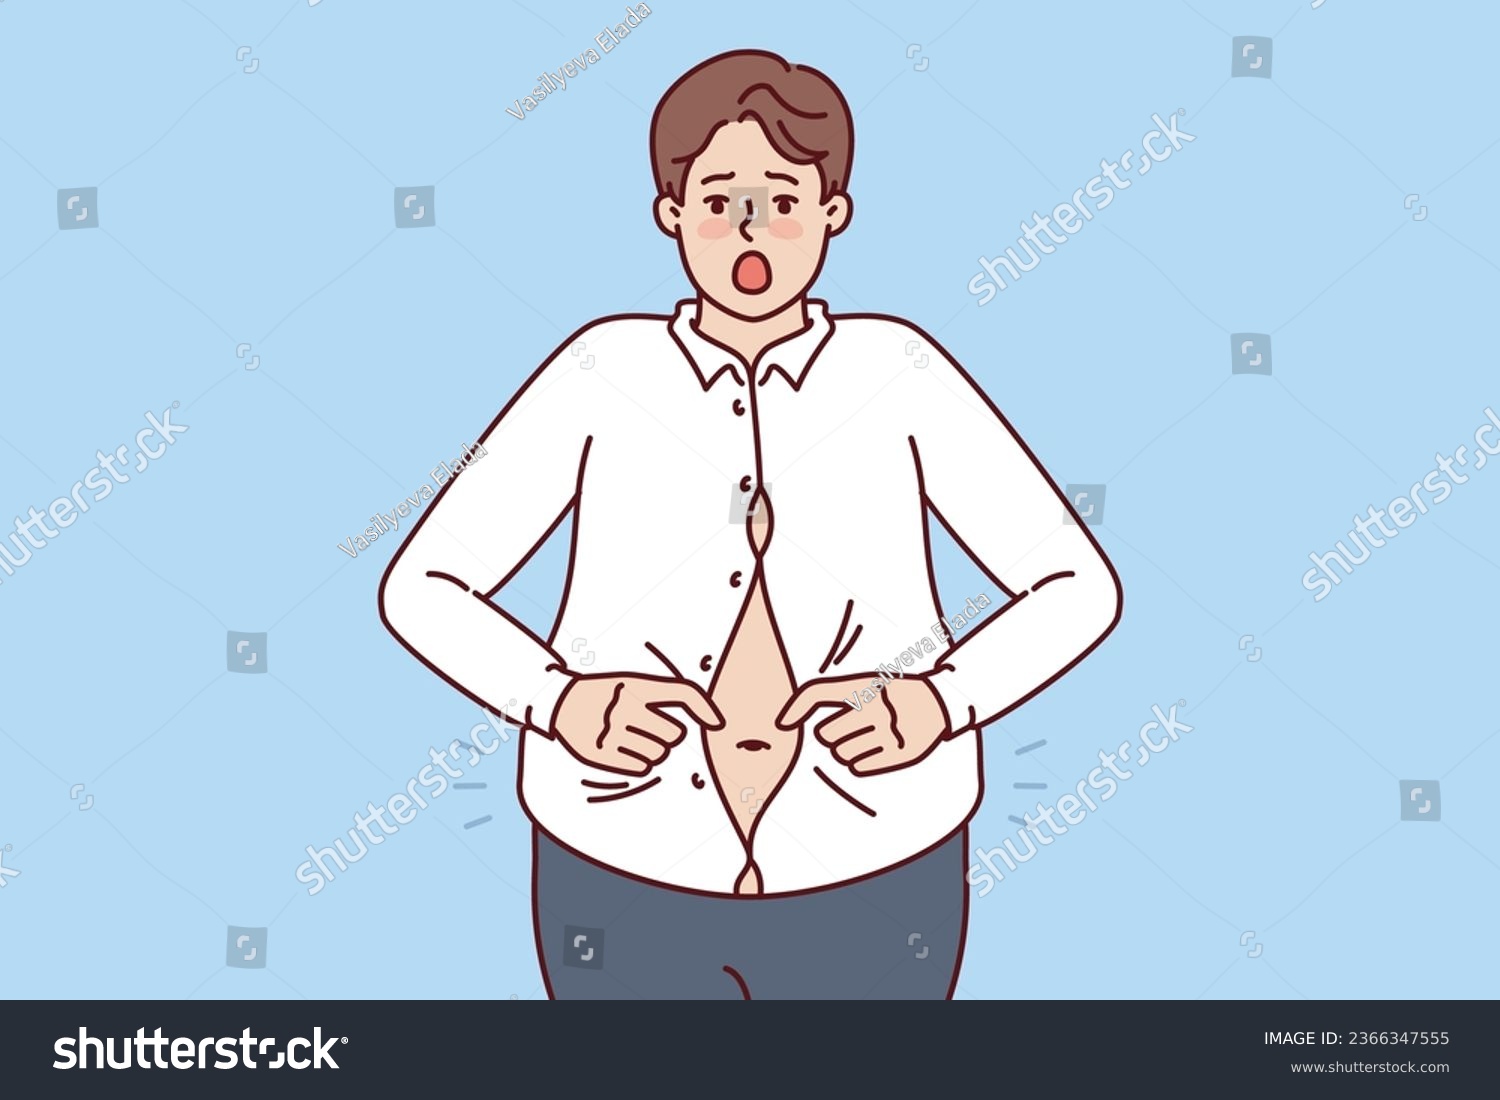 SVG of Fat man with big belly is trying to button up small shirt and is screaming in excitement at being overweight. Overweight guy needs help of nutritionist or fitness trainer to get rid of excess weight. svg